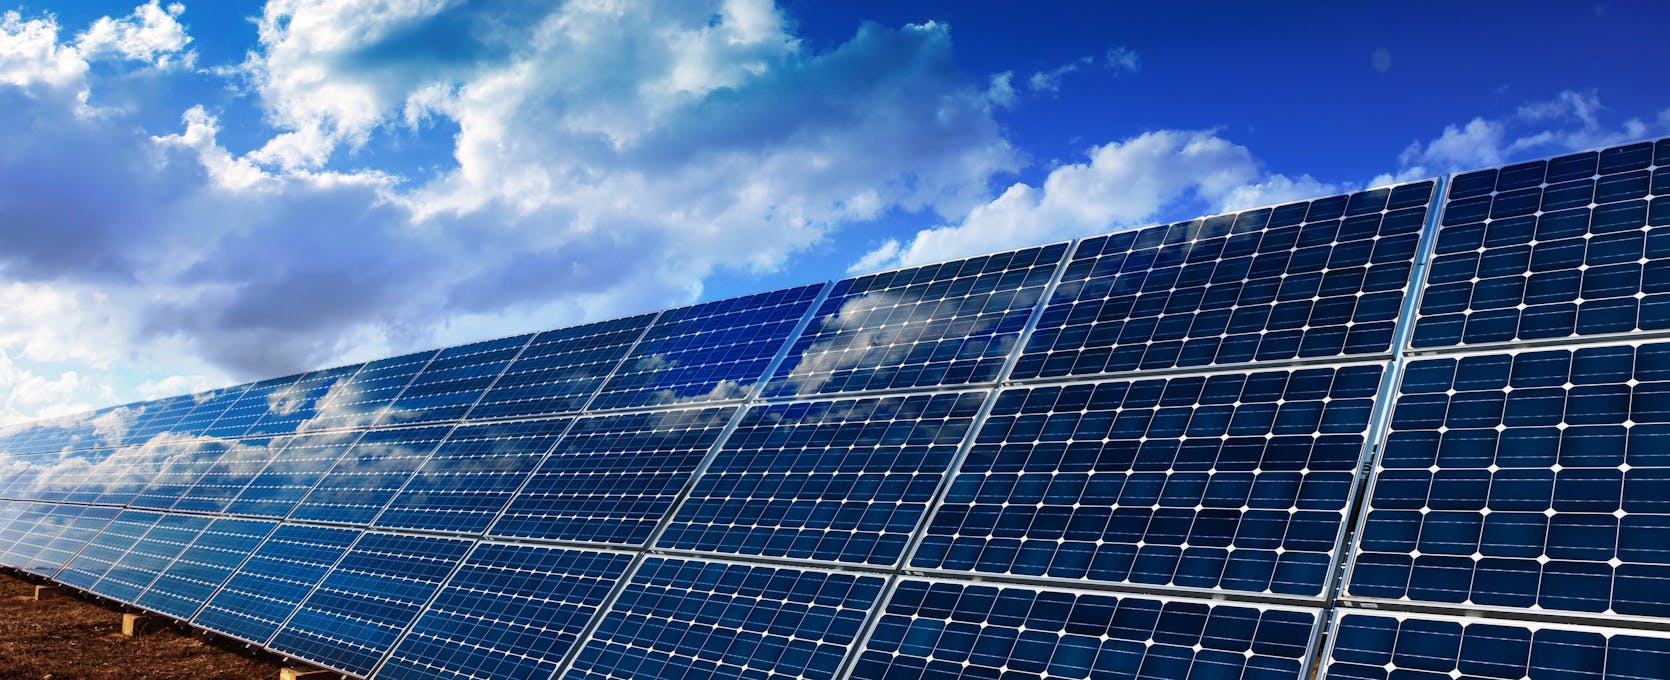 Solar panels for energy tax credits